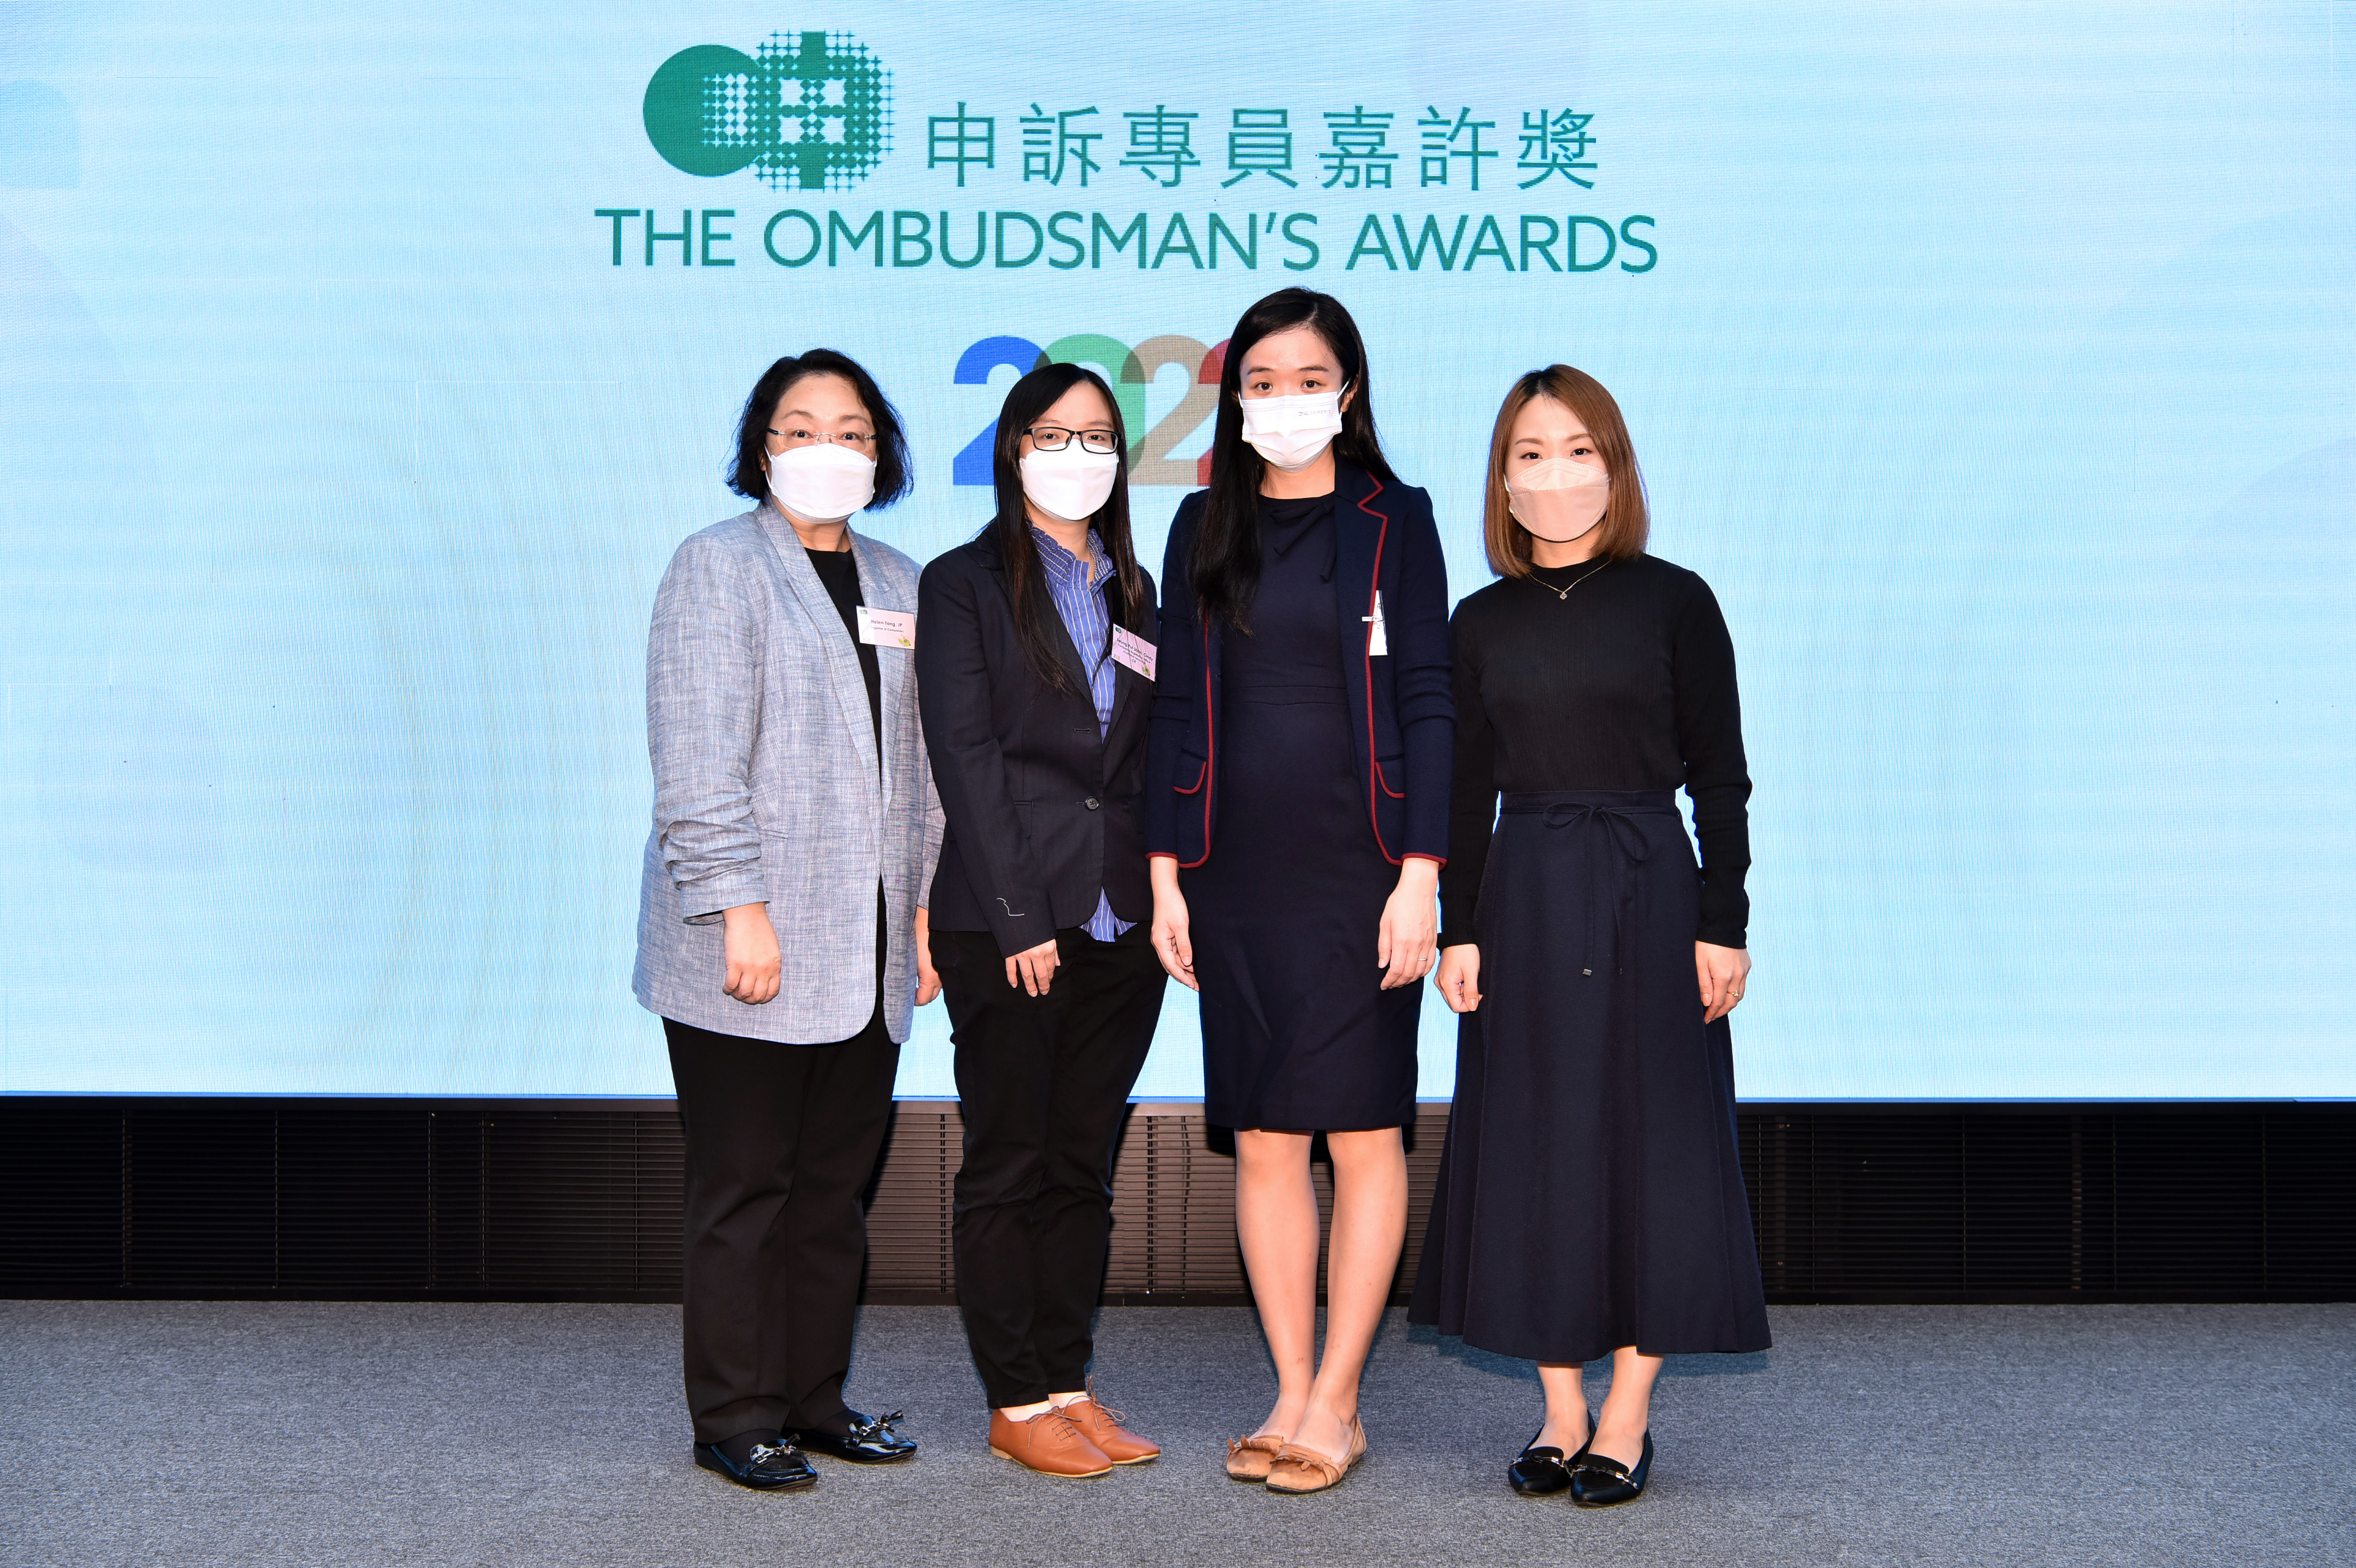 Miss Helen Tang, Registrar of Companies (first left), Ms Katrina Suen, Deputy Registry Manager (first right) and the awardees Ms Cindy Leung, Assistant Registry Manager (second left) and Ms Yan Wong, Companies Registration Officer I (second right) at the Award Presentation Ceremony.